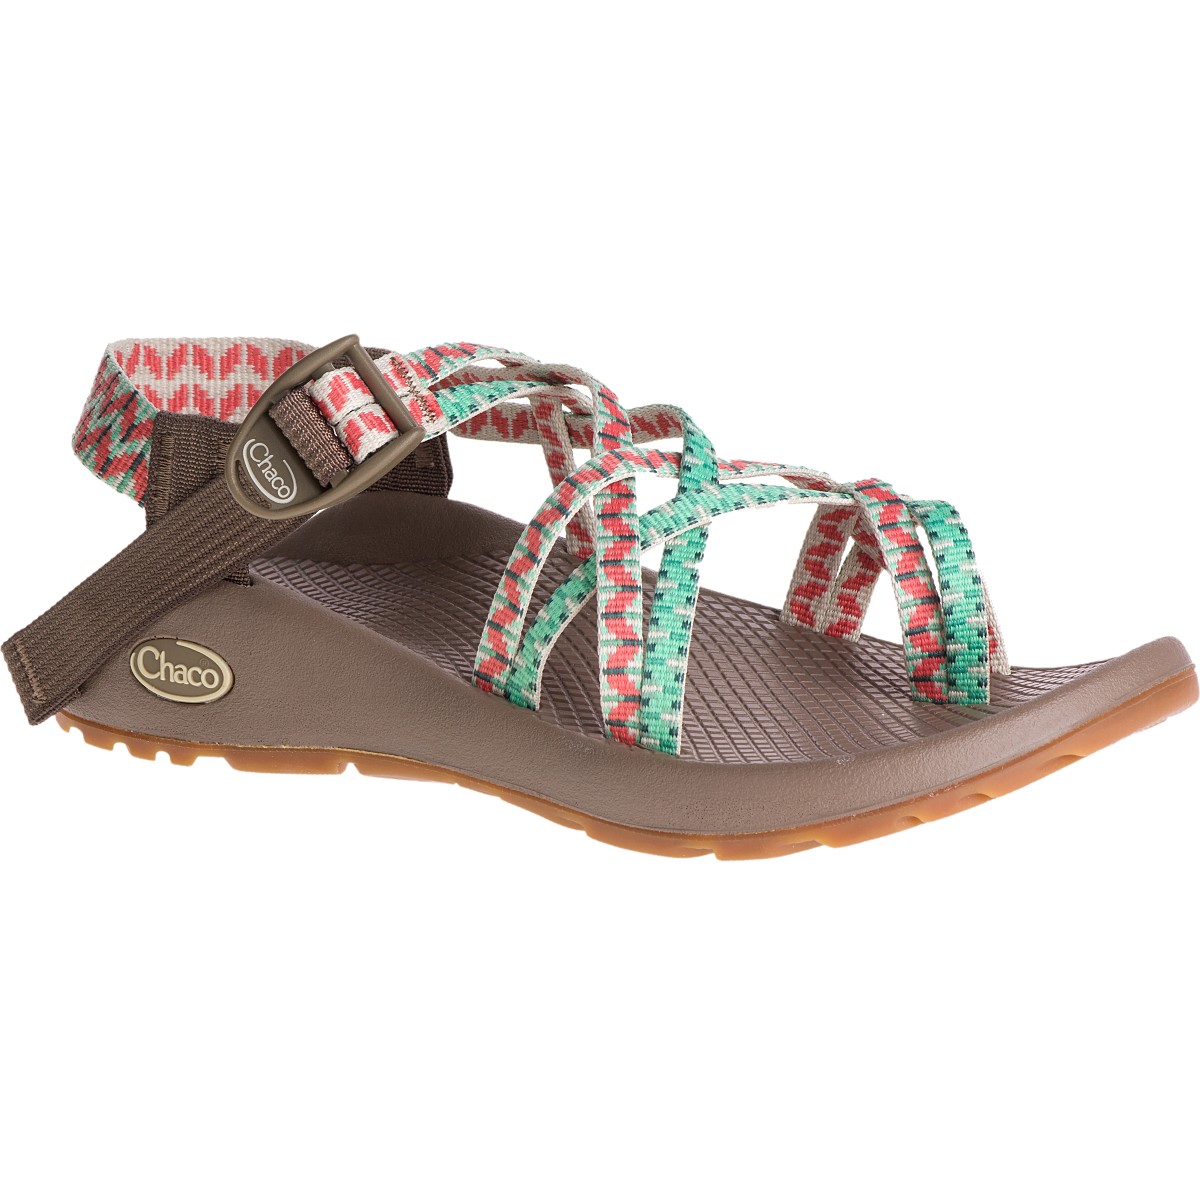 chaco zx2 classic sandal